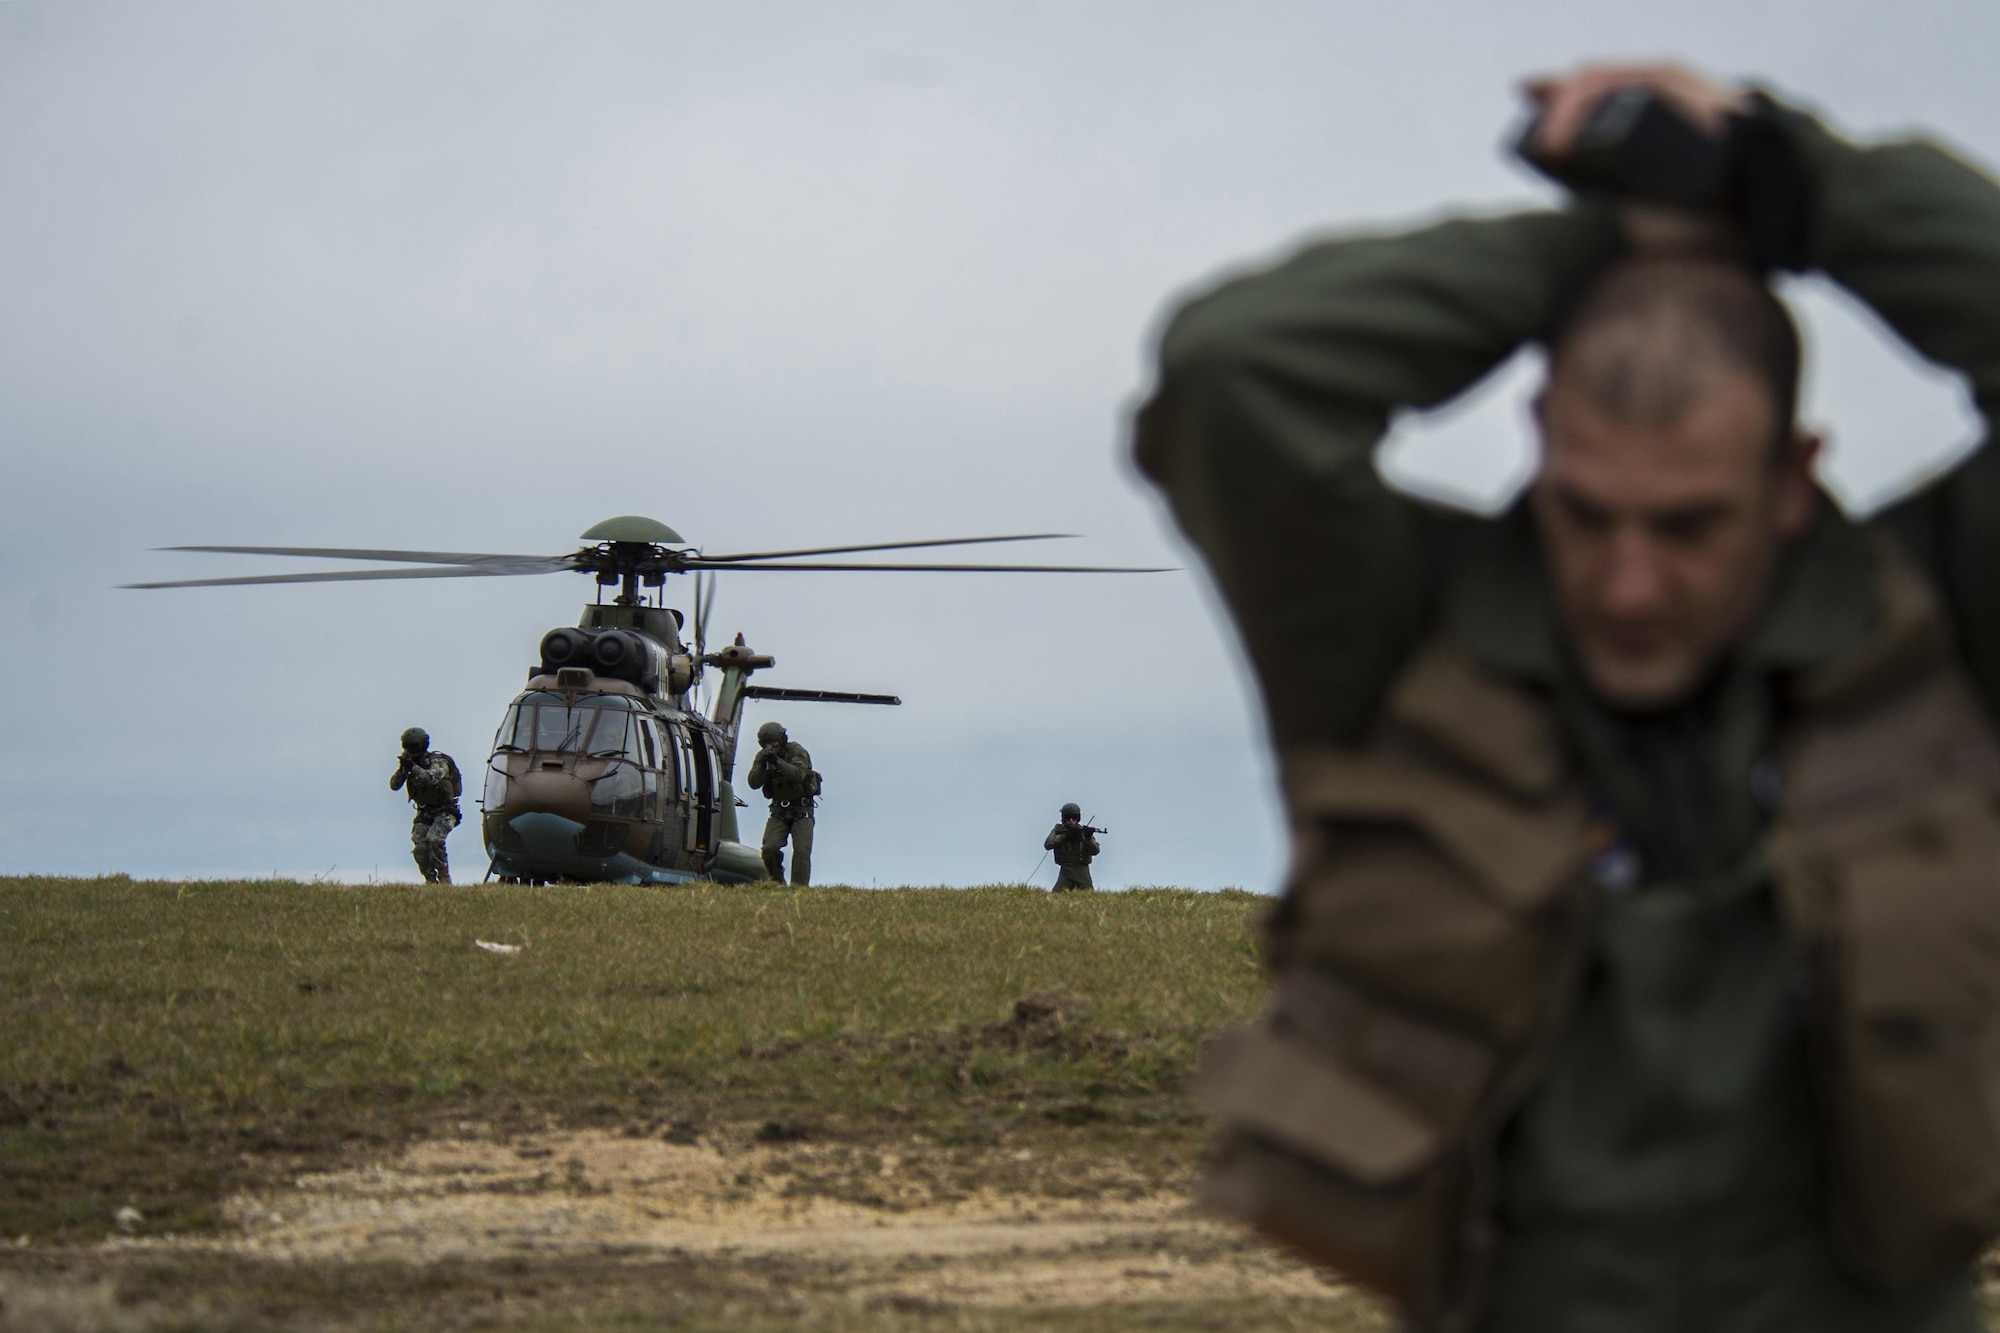 PLOVDIV, Bulgaria - Members of the Bulgarian Special Forces exit a Bulgarian AS-532 Cougar helicopter and move toward Italian air force Captain Roberto Manzo, a 74th Expeditionary Fighter Squadron A-10C Thunderbolt II aircraft exchange pilot, during combat search and rescue training near Plovdiv, Bulgaria, Feb. 11, 2016. The Special Forces had to verify that Manzo is the correct person they are looking for before extracting him. (U.S. Air Force photo by Airman 1st Class Luke Kitterman/Released)